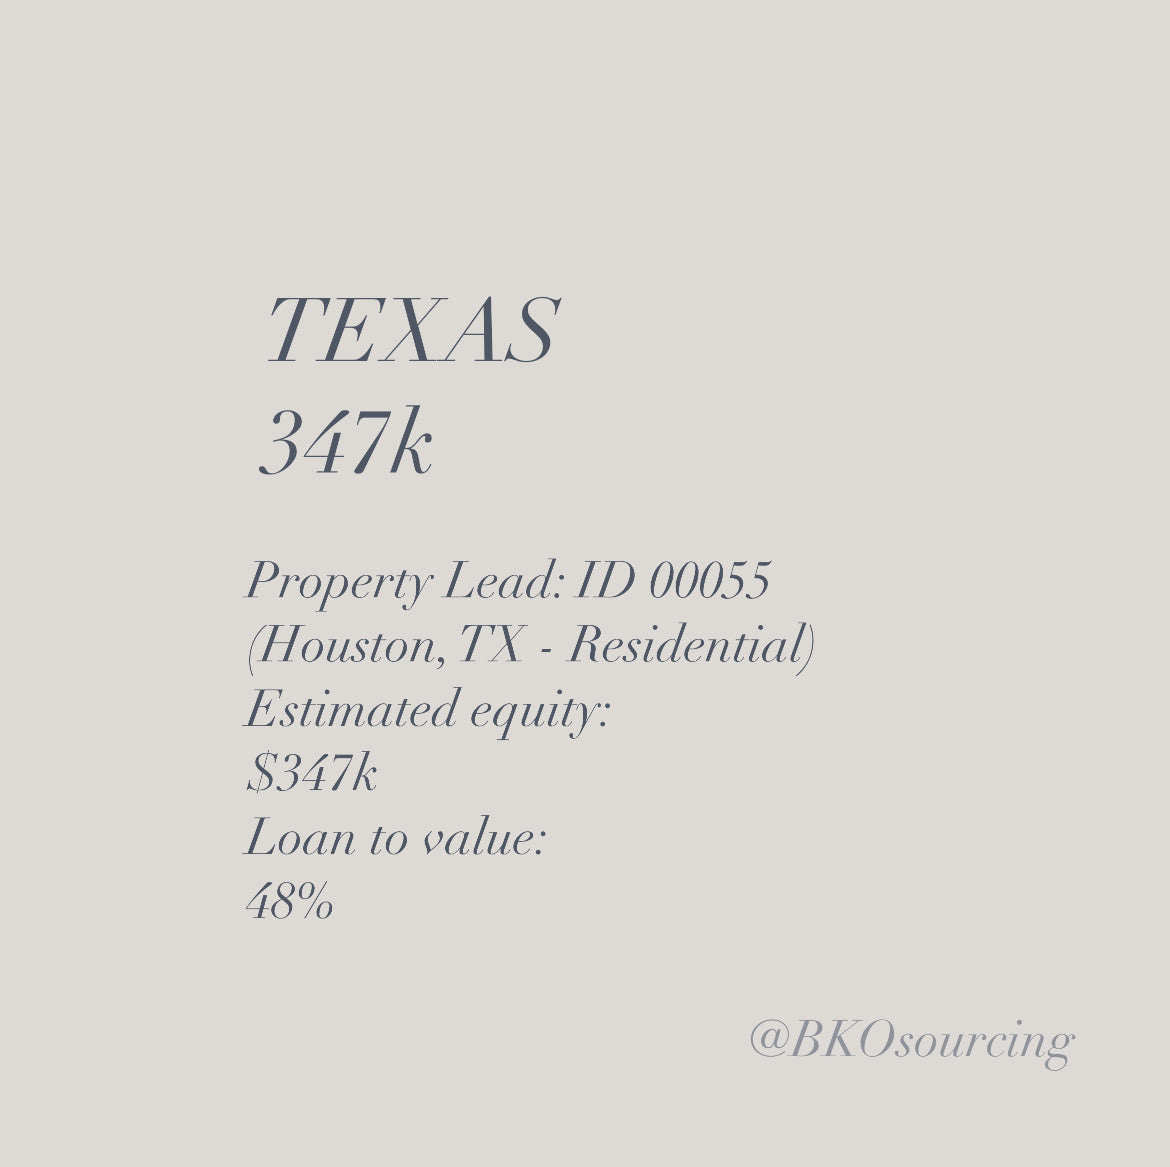 Property Lead 00055 - Texas - Houston - 347k - 48% - 2023-25OCT - with comparables